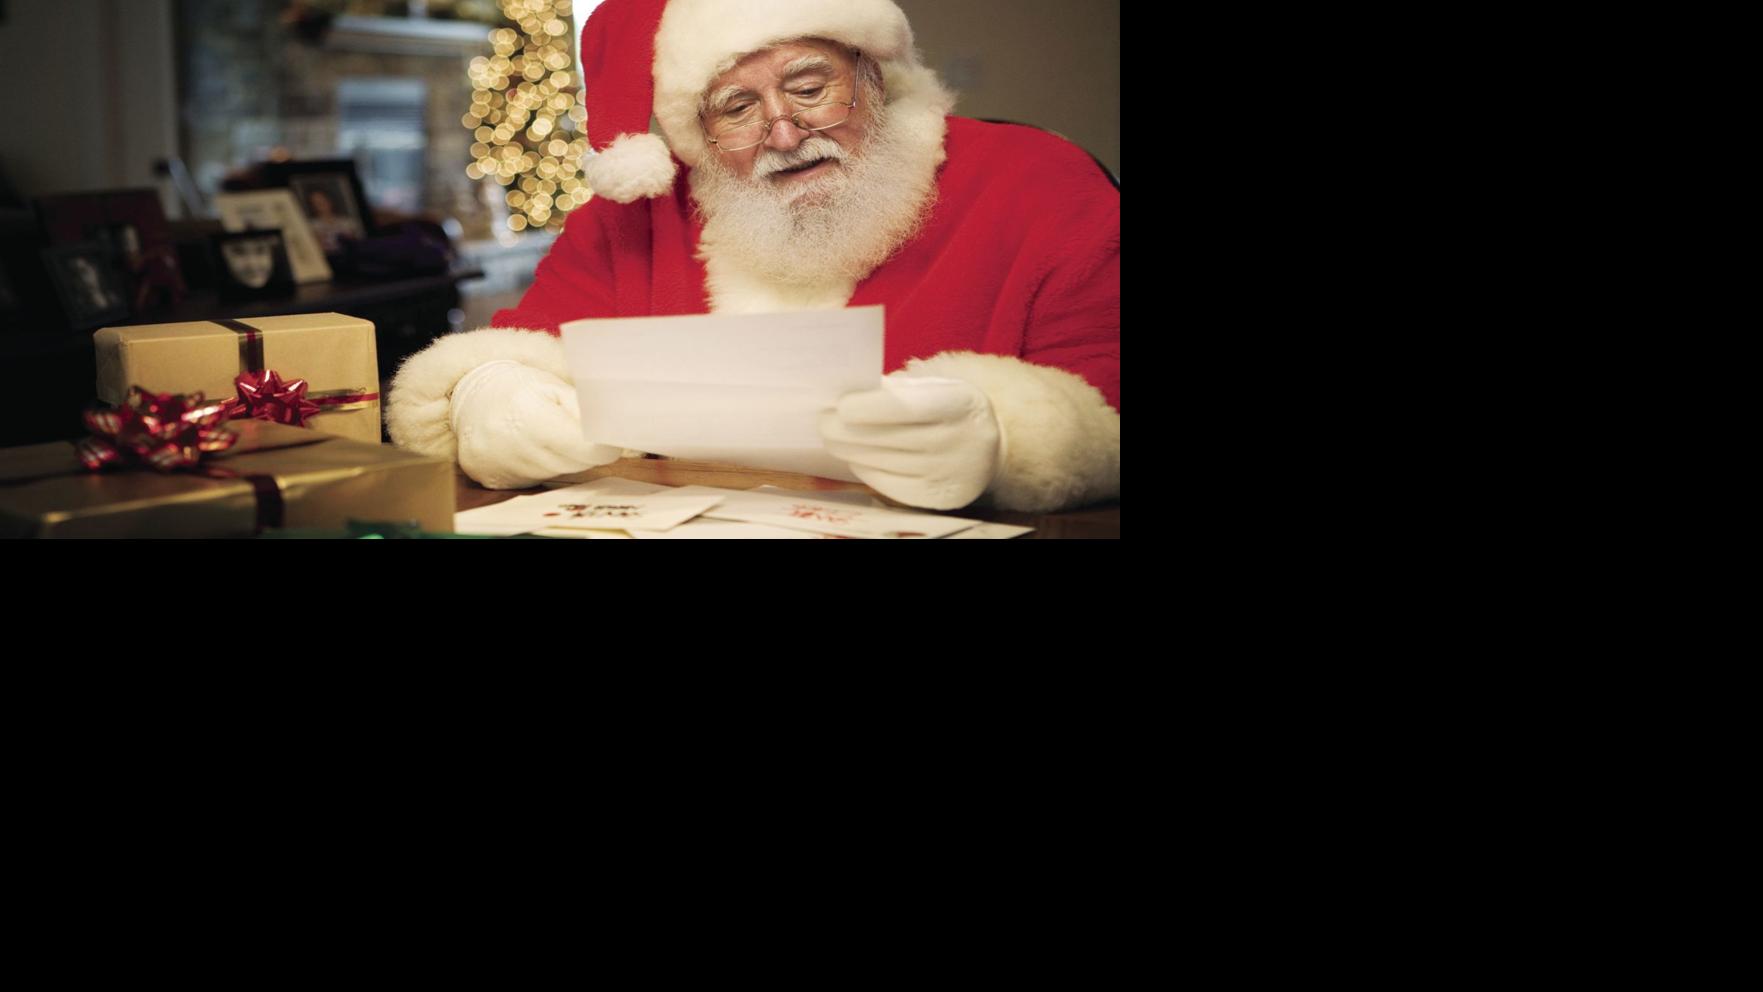 Find Your Child S List Letters To Santa 2018 Local Herald Review Com - videos of santa and jelly playing roblox